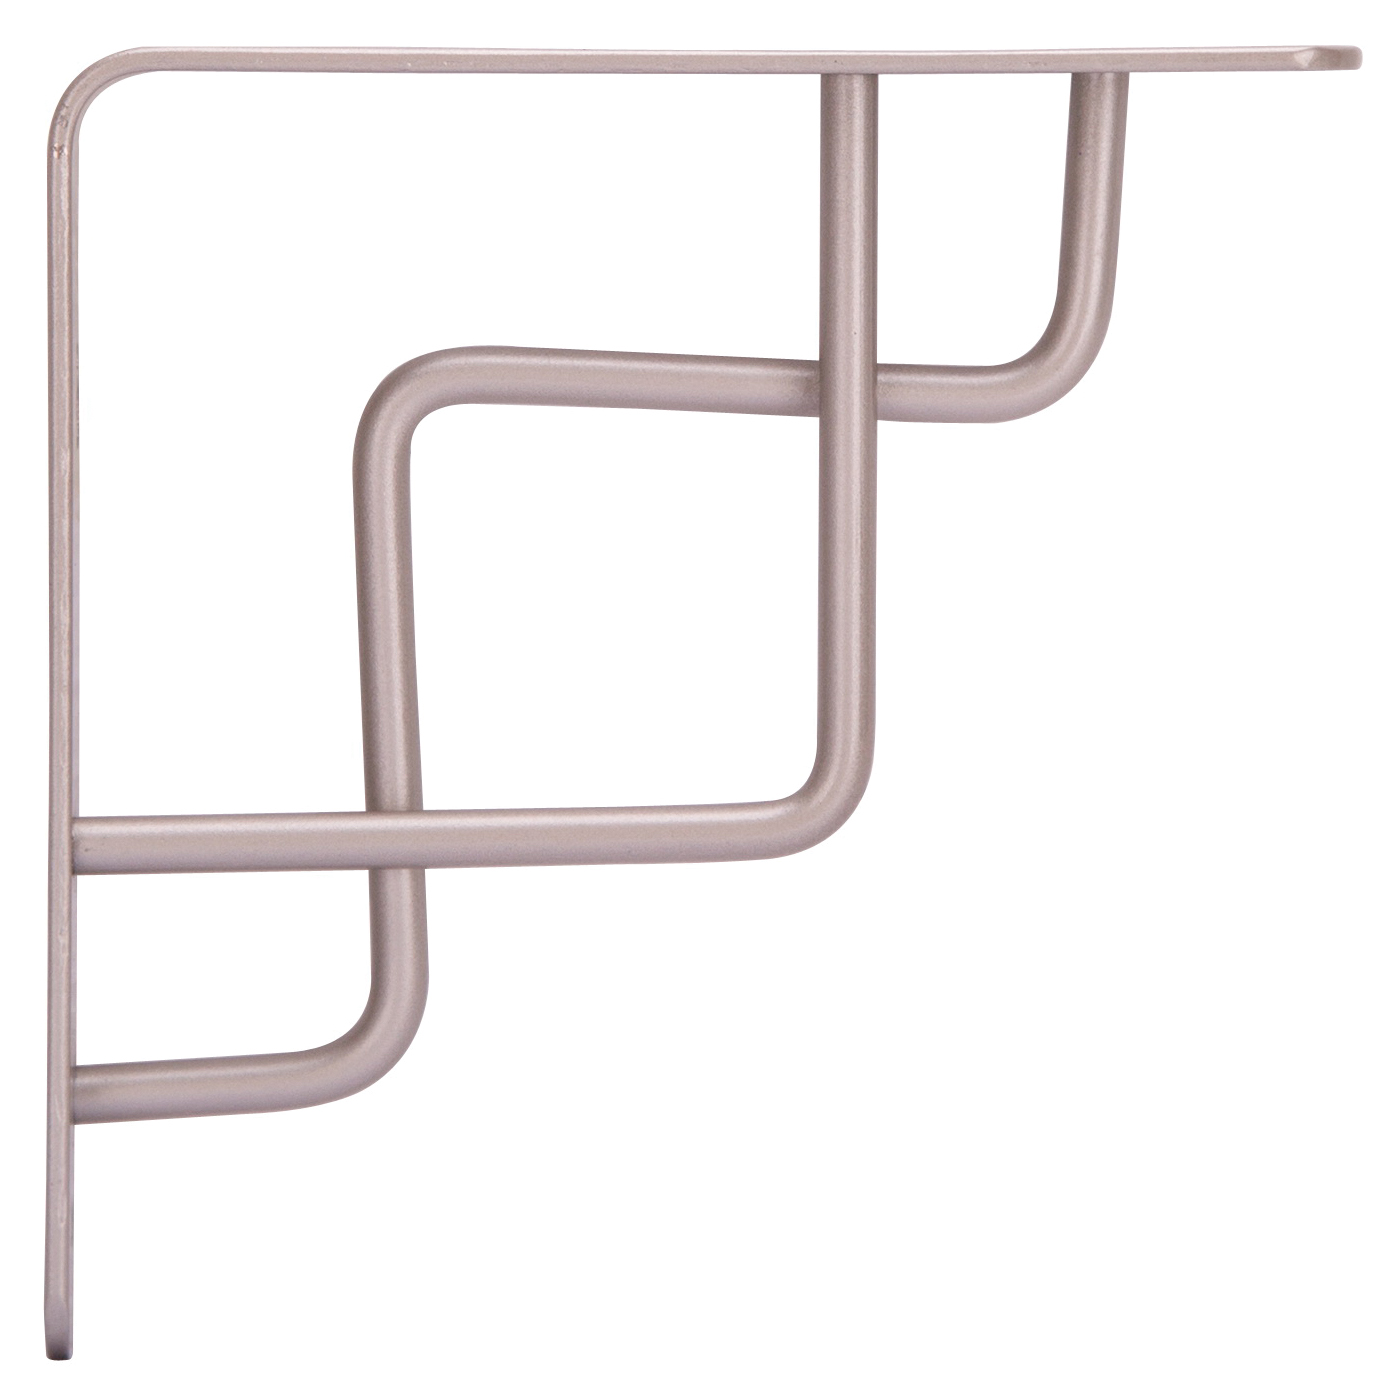 SB-025PS Contemporary and Decorative Shelf Bracket, 132 lb/Pair, 6-1/8 in L, 6-1/8 in H, Steel, Satin Nickel